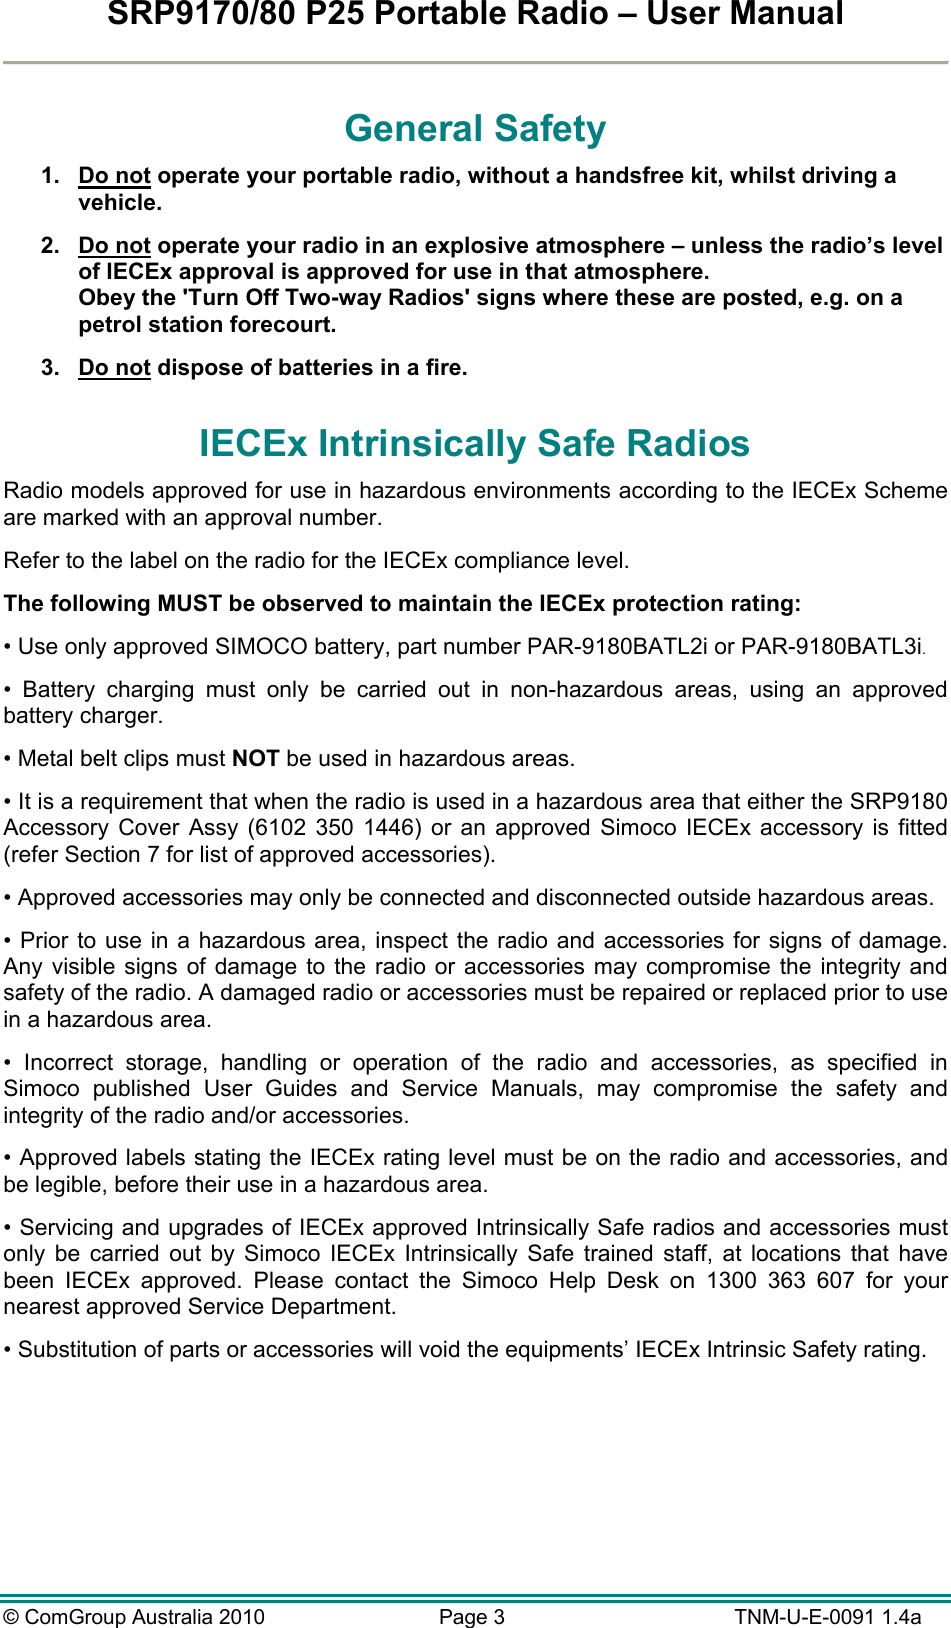 SRP9170/80 P25 Portable Radio – User Manual  © ComGroup Australia 2010  Page 3   TNM-U-E-0091 1.4a General Safety 1. Do not operate your portable radio, without a handsfree kit, whilst driving a vehicle. 2. Do not operate your radio in an explosive atmosphere – unless the radio’s level of IECEx approval is approved for use in that atmosphere. Obey the &apos;Turn Off Two-way Radios&apos; signs where these are posted, e.g. on a petrol station forecourt. 3. Do not dispose of batteries in a fire. IECEx Intrinsically Safe Radios Radio models approved for use in hazardous environments according to the IECEx Scheme are marked with an approval number. Refer to the label on the radio for the IECEx compliance level. The following MUST be observed to maintain the IECEx protection rating: • Use only approved SIMOCO battery, part number PAR-9180BATL2i or PAR-9180BATL3i. • Battery charging must only be carried out in non-hazardous areas, using an approved battery charger. • Metal belt clips must NOT be used in hazardous areas. • It is a requirement that when the radio is used in a hazardous area that either the SRP9180 Accessory Cover Assy (6102 350 1446) or an approved Simoco IECEx accessory is fitted (refer Section 7 for list of approved accessories). • Approved accessories may only be connected and disconnected outside hazardous areas. • Prior to use in a hazardous area, inspect the radio and accessories for signs of damage. Any visible signs of damage to the radio or accessories may compromise the integrity and safety of the radio. A damaged radio or accessories must be repaired or replaced prior to use in a hazardous area. • Incorrect storage, handling or operation of the radio and accessories, as specified in Simoco published User Guides and Service Manuals, may compromise the safety and integrity of the radio and/or accessories. • Approved labels stating the IECEx rating level must be on the radio and accessories, and be legible, before their use in a hazardous area. • Servicing and upgrades of IECEx approved Intrinsically Safe radios and accessories must only be carried out by Simoco IECEx Intrinsically Safe trained staff, at locations that have been IECEx approved. Please contact the Simoco Help Desk on 1300 363 607 for your nearest approved Service Department. • Substitution of parts or accessories will void the equipments’ IECEx Intrinsic Safety rating.  